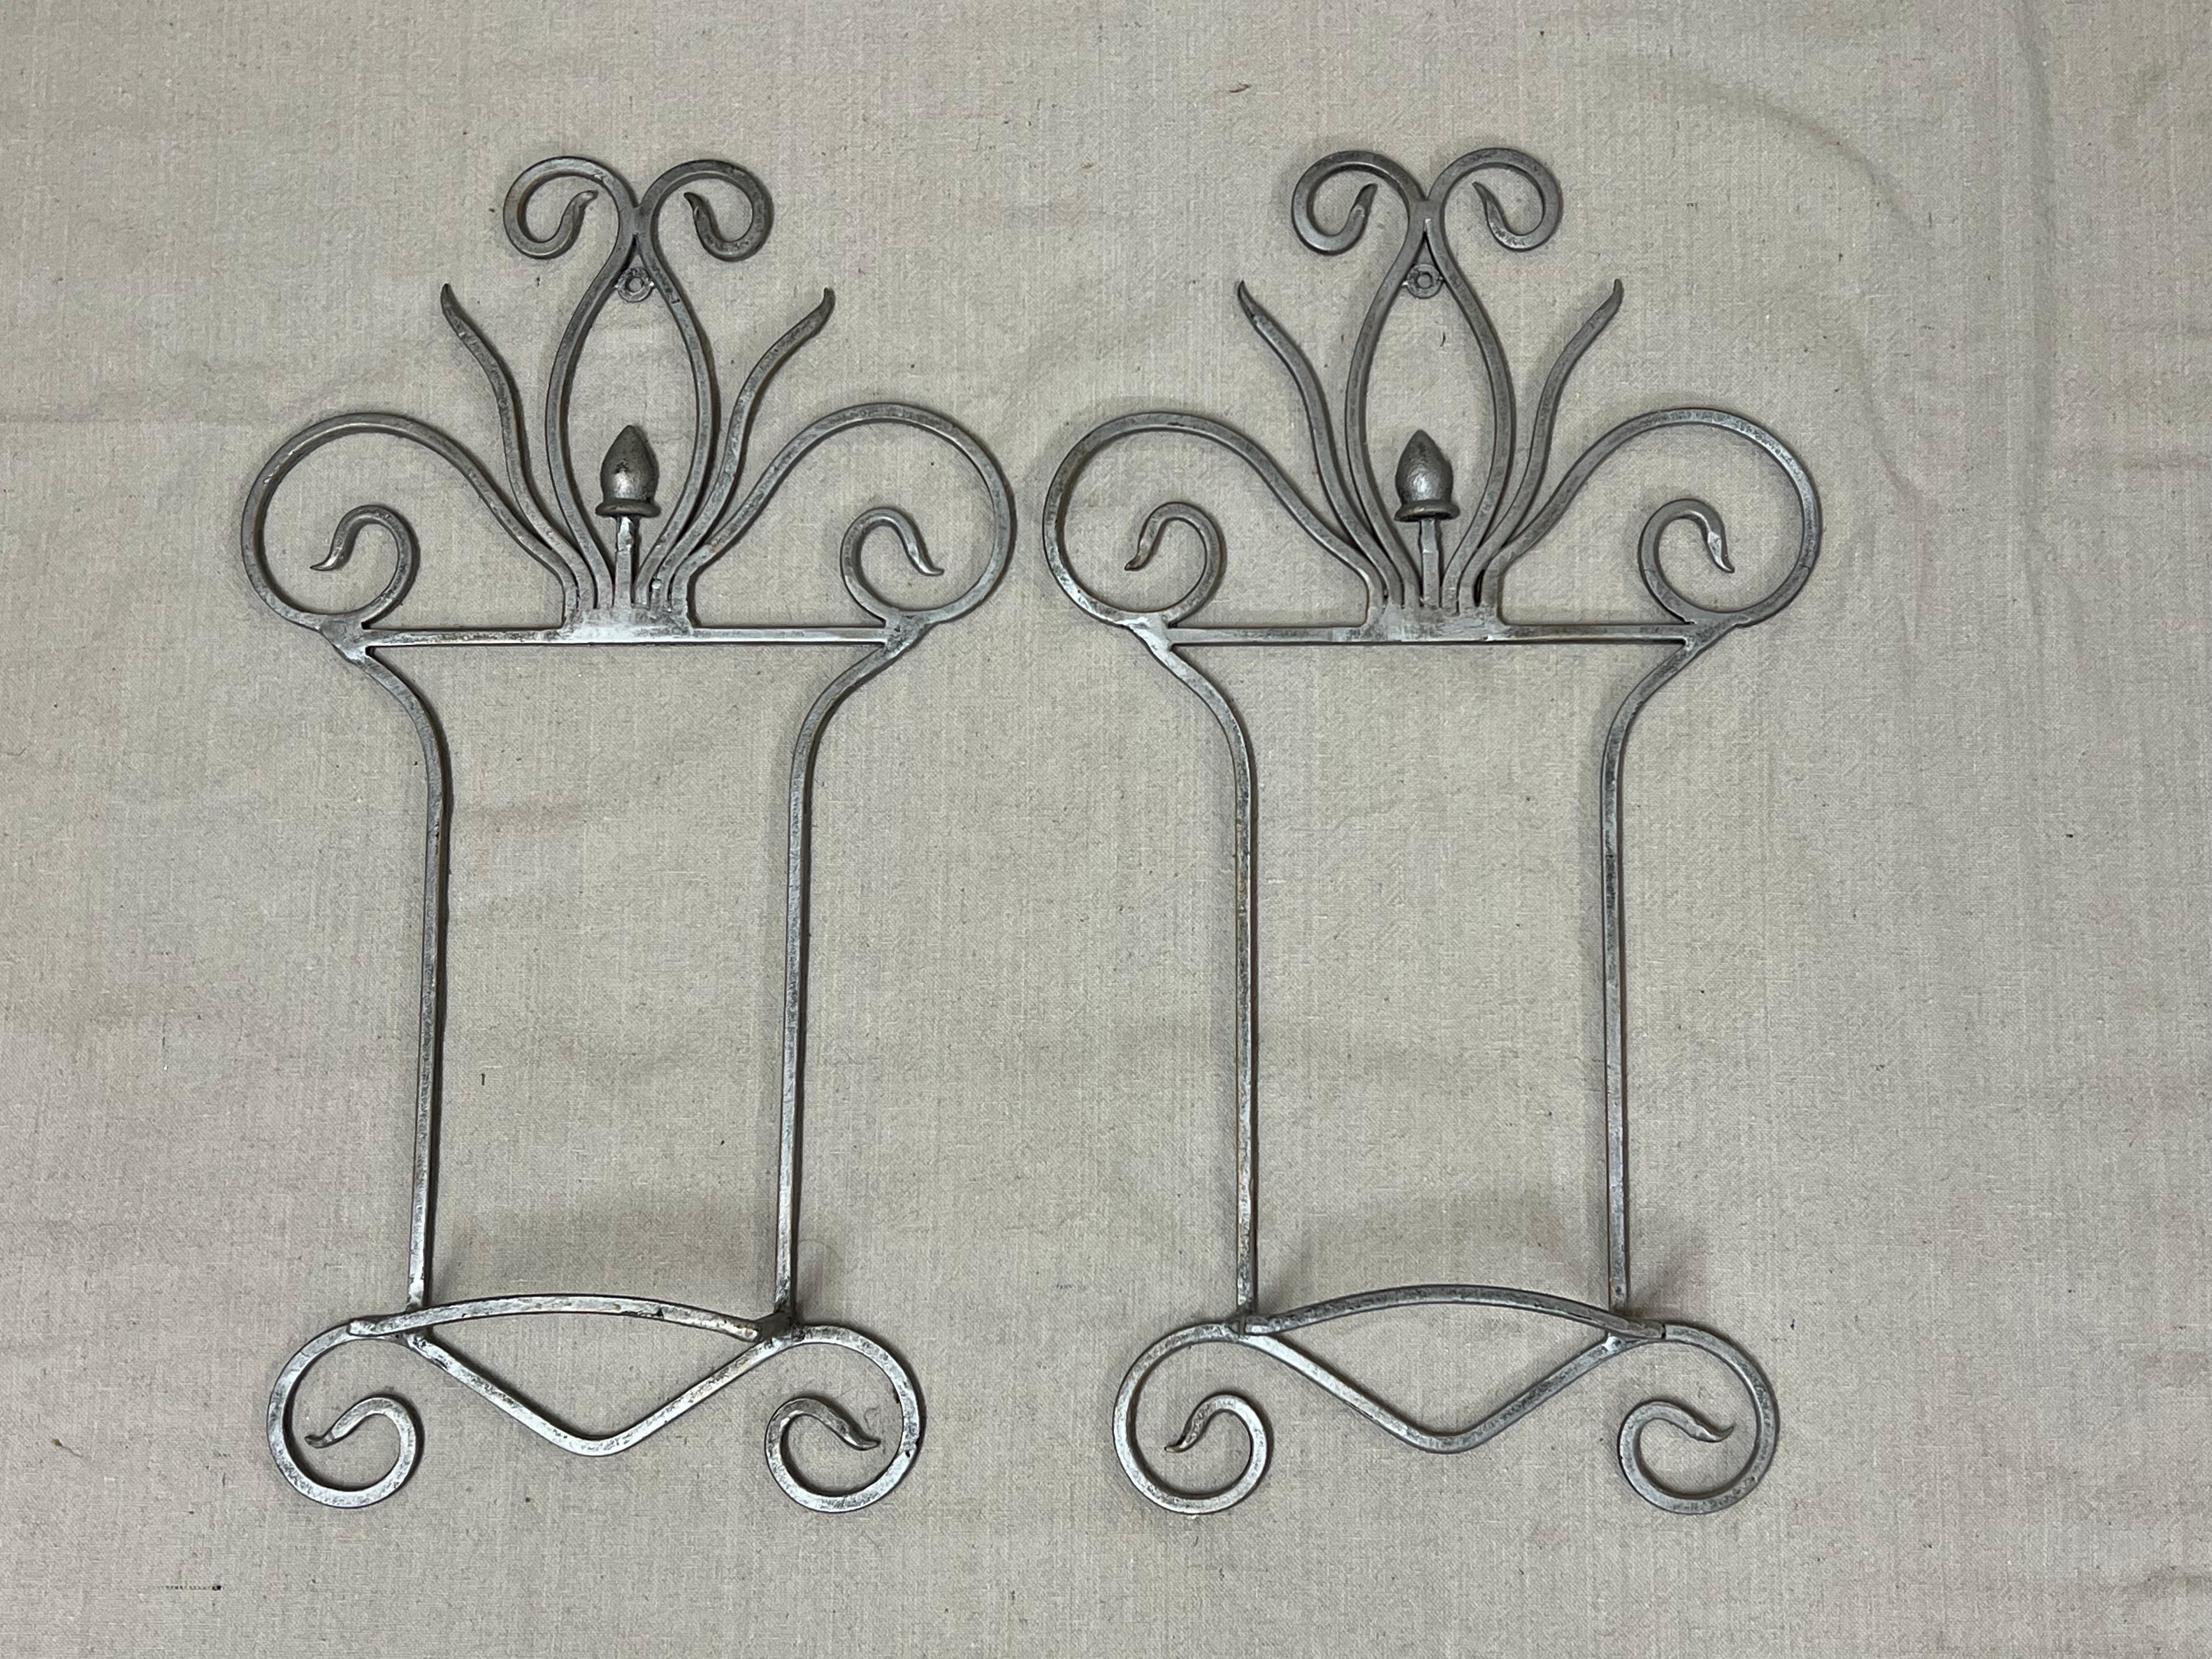 Price is for 2 . A pair. 
Pair of Large Silver Floral Hand Towel Racks. Nice decorative racks to hold towels or scarves . Perfect for that formal powder room to hold your monogrammed linen hand towels. Or use in a dressing room to hang scarves on.